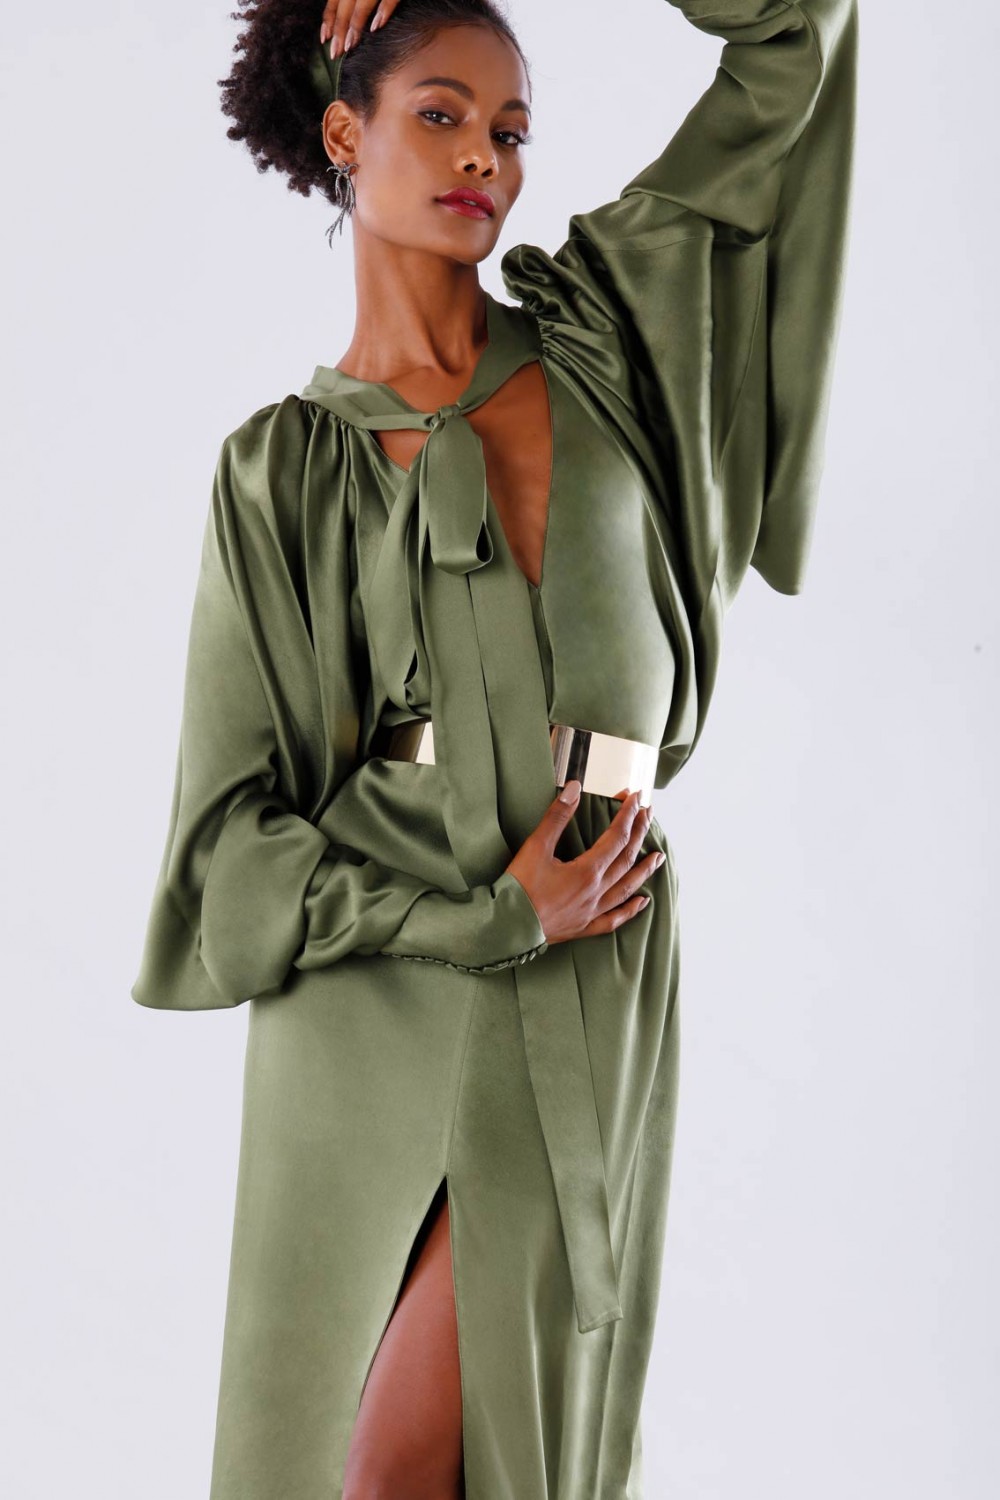 Olive dress with bat sleeves